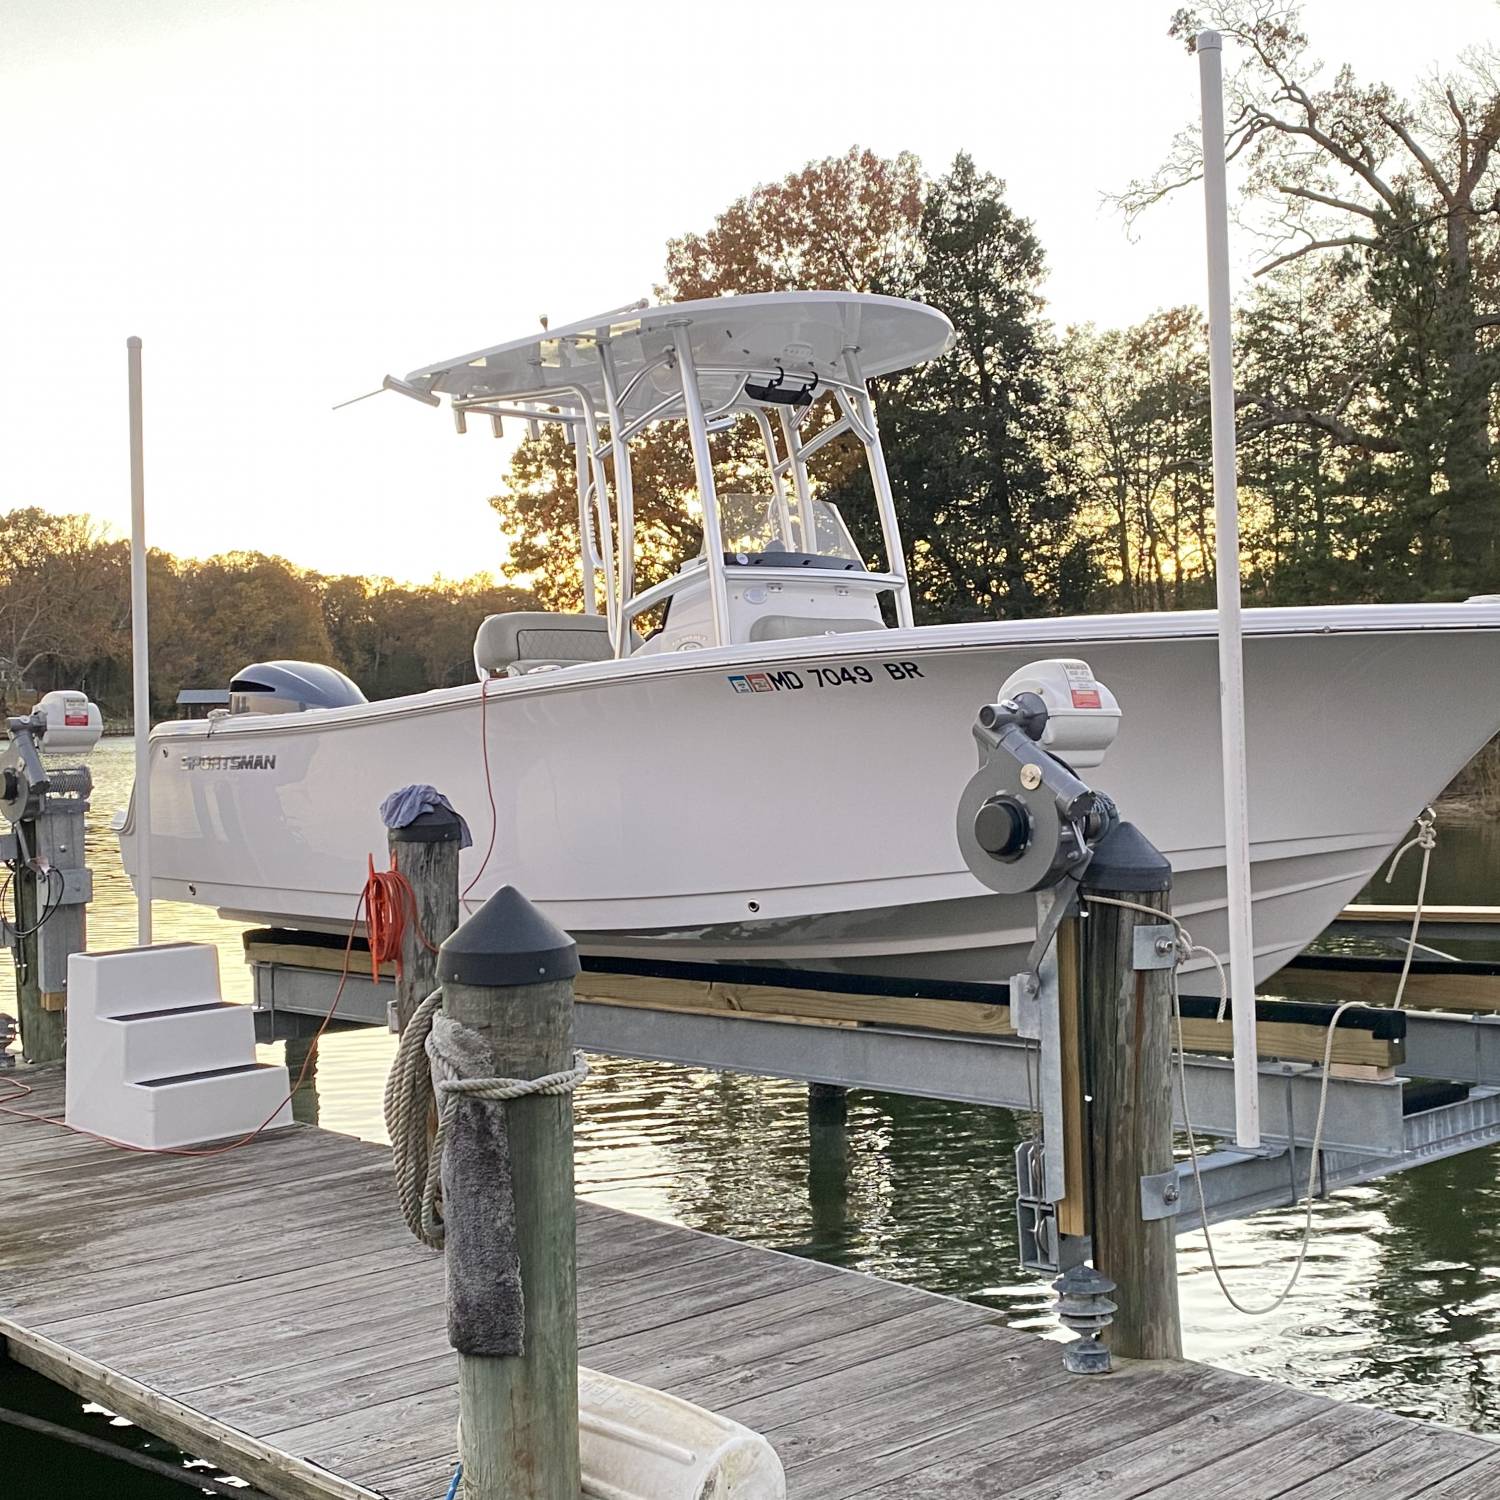 Title: So Ready - On board their Sportsman Heritage 231 Center Console - Location: Solomon Island Md. Participating in the Photo Contest #SportsmanApril